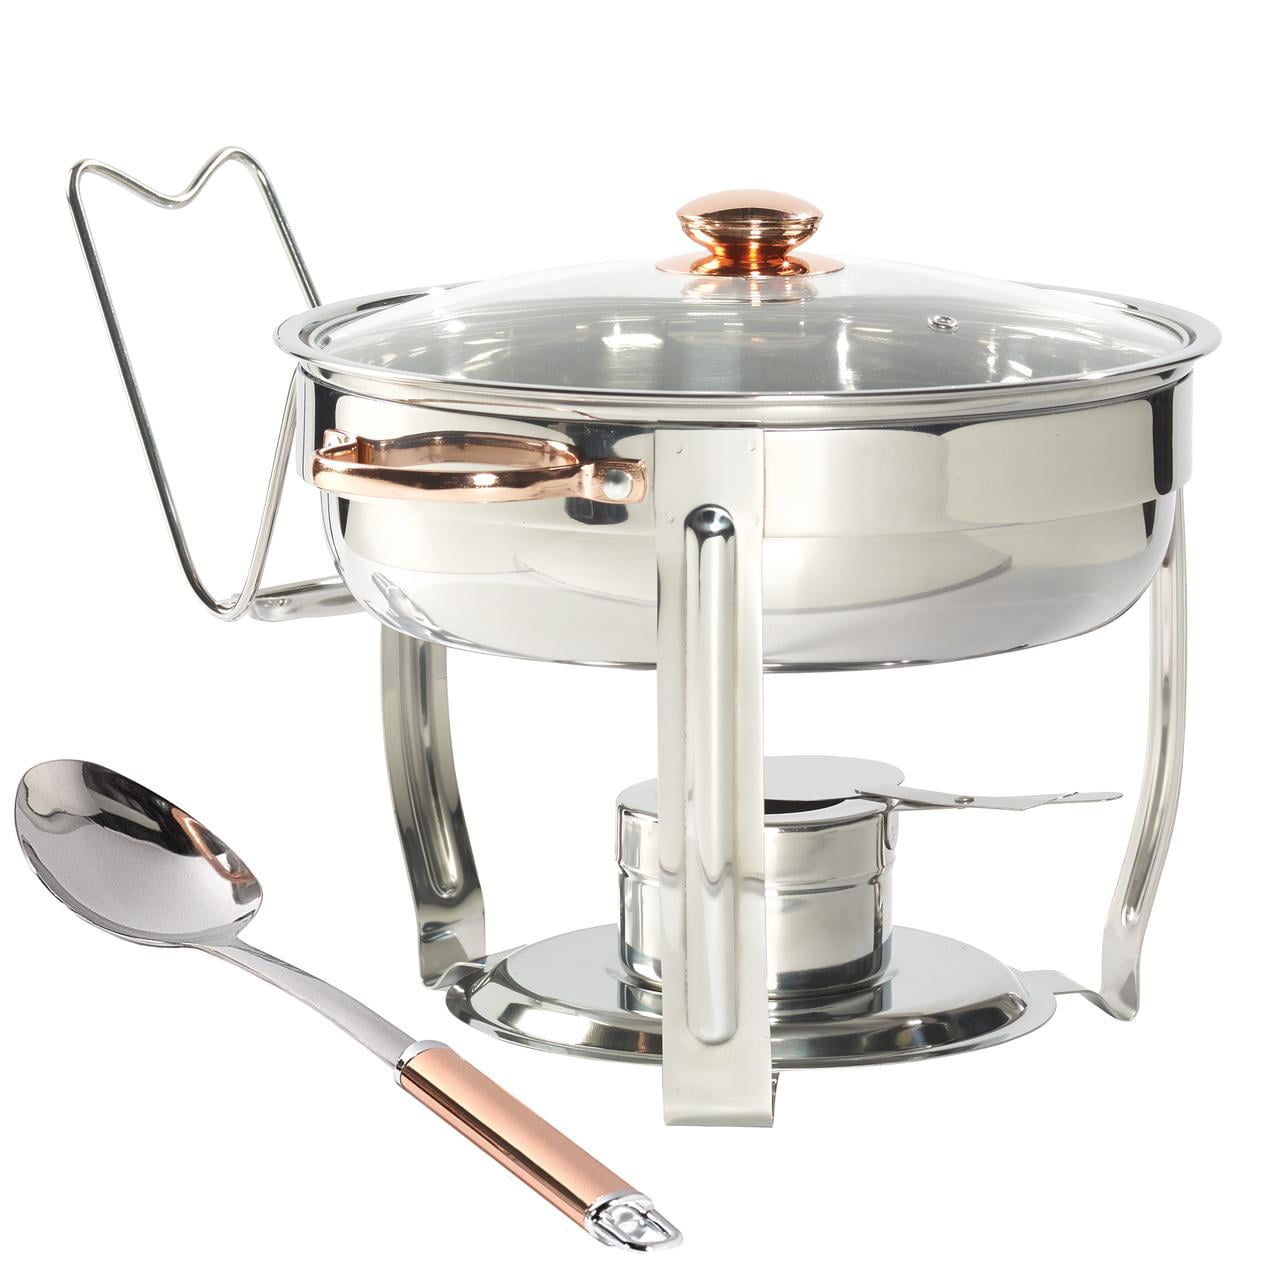 Details about   ZOKOP 2 PACK 9L Stainless Steel Oval Chafer Chafing Dish Set 1/3 Size Party US 